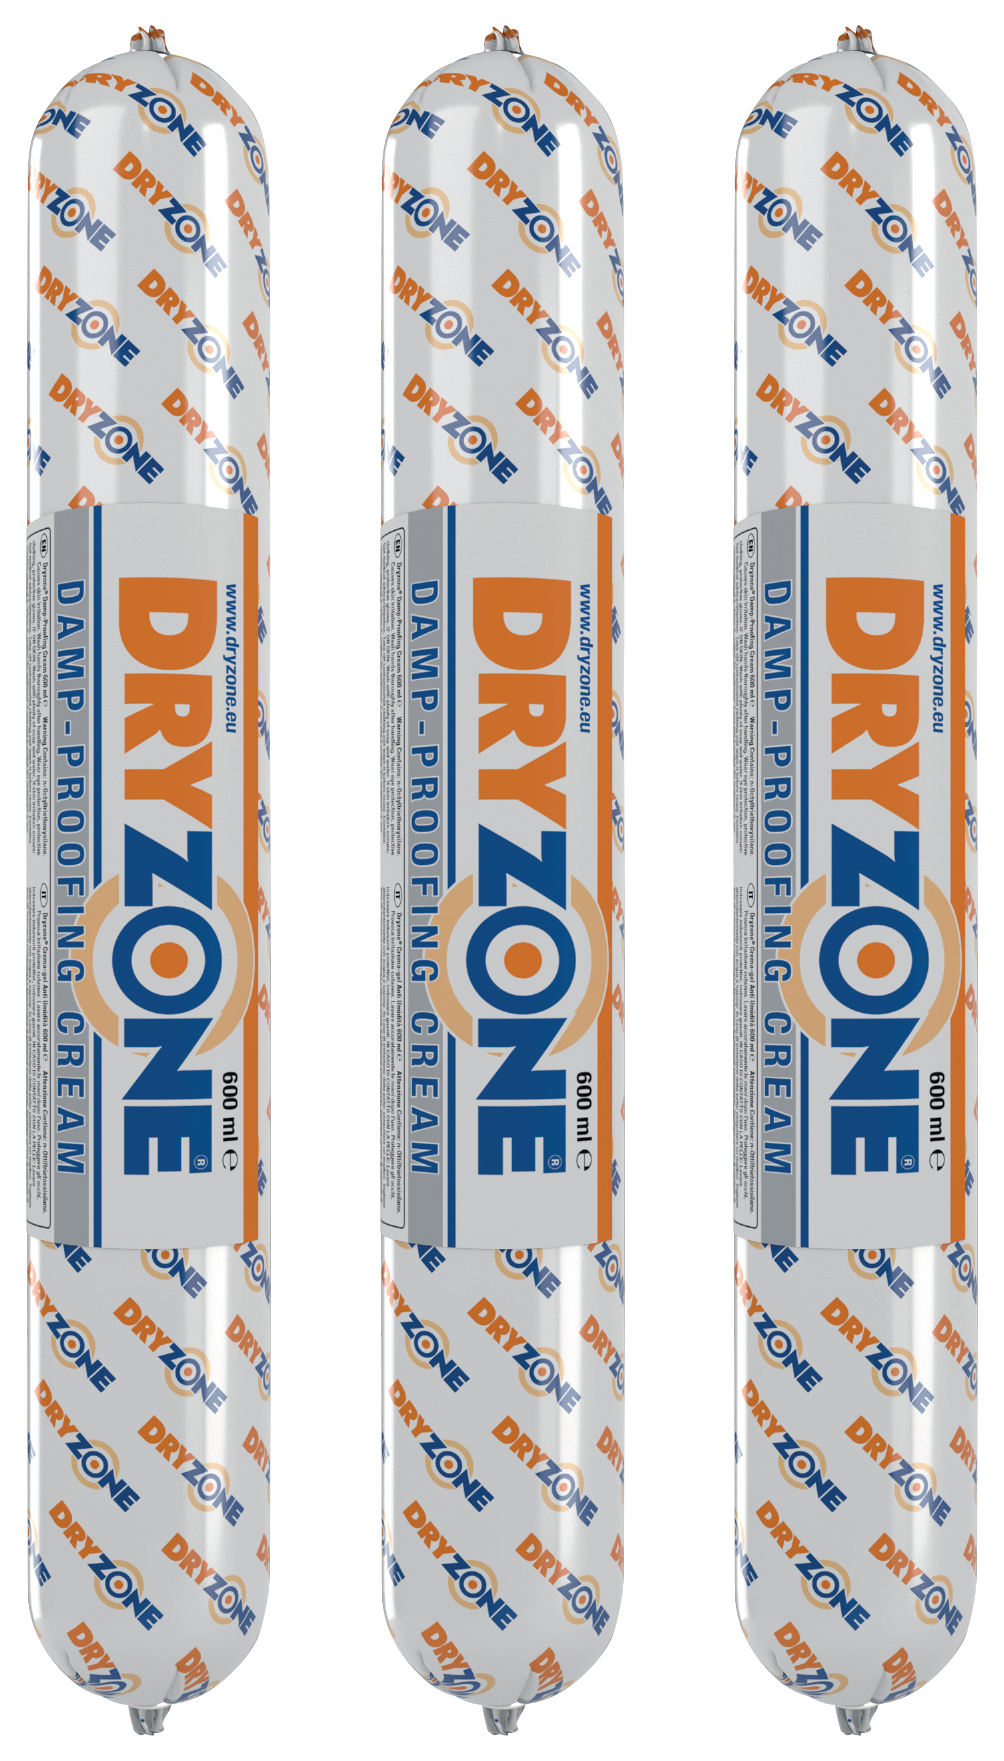 Image of Dryzone Damp Proof Course Cream Foil Cartridge - 600ml - Pack of 3